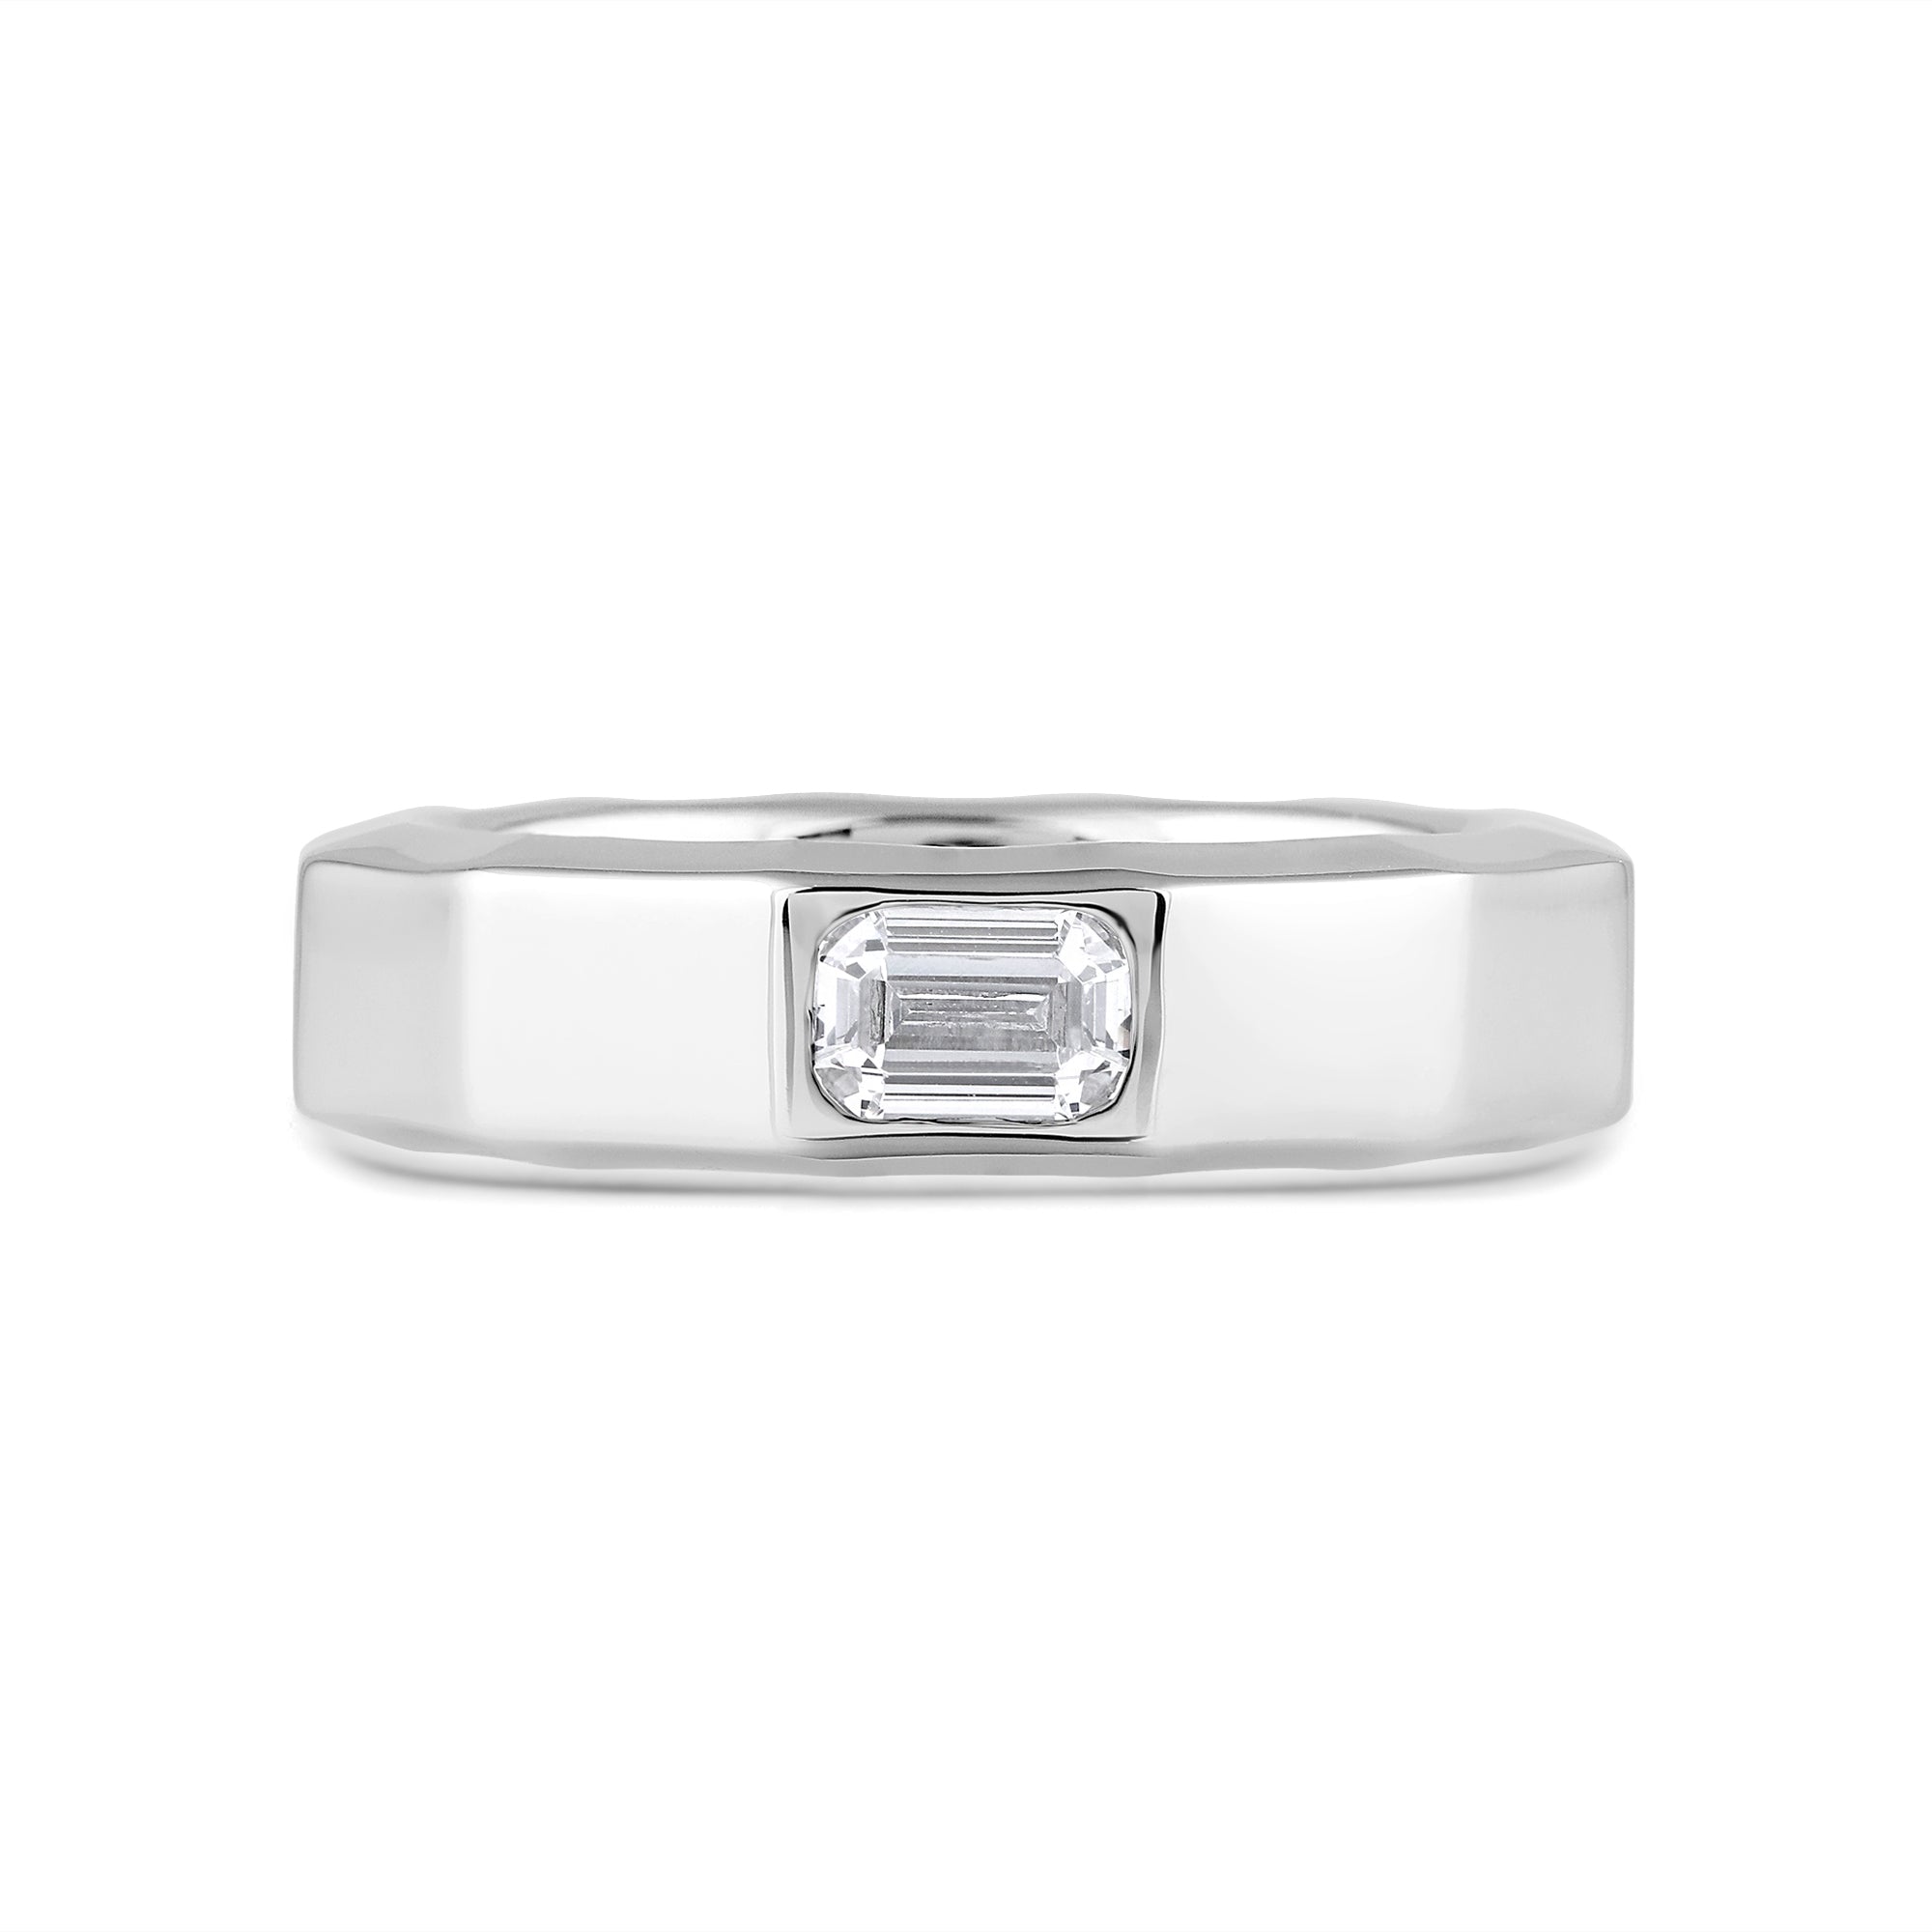 Faceted Bezel Men's Engagement Ring – With Clarity